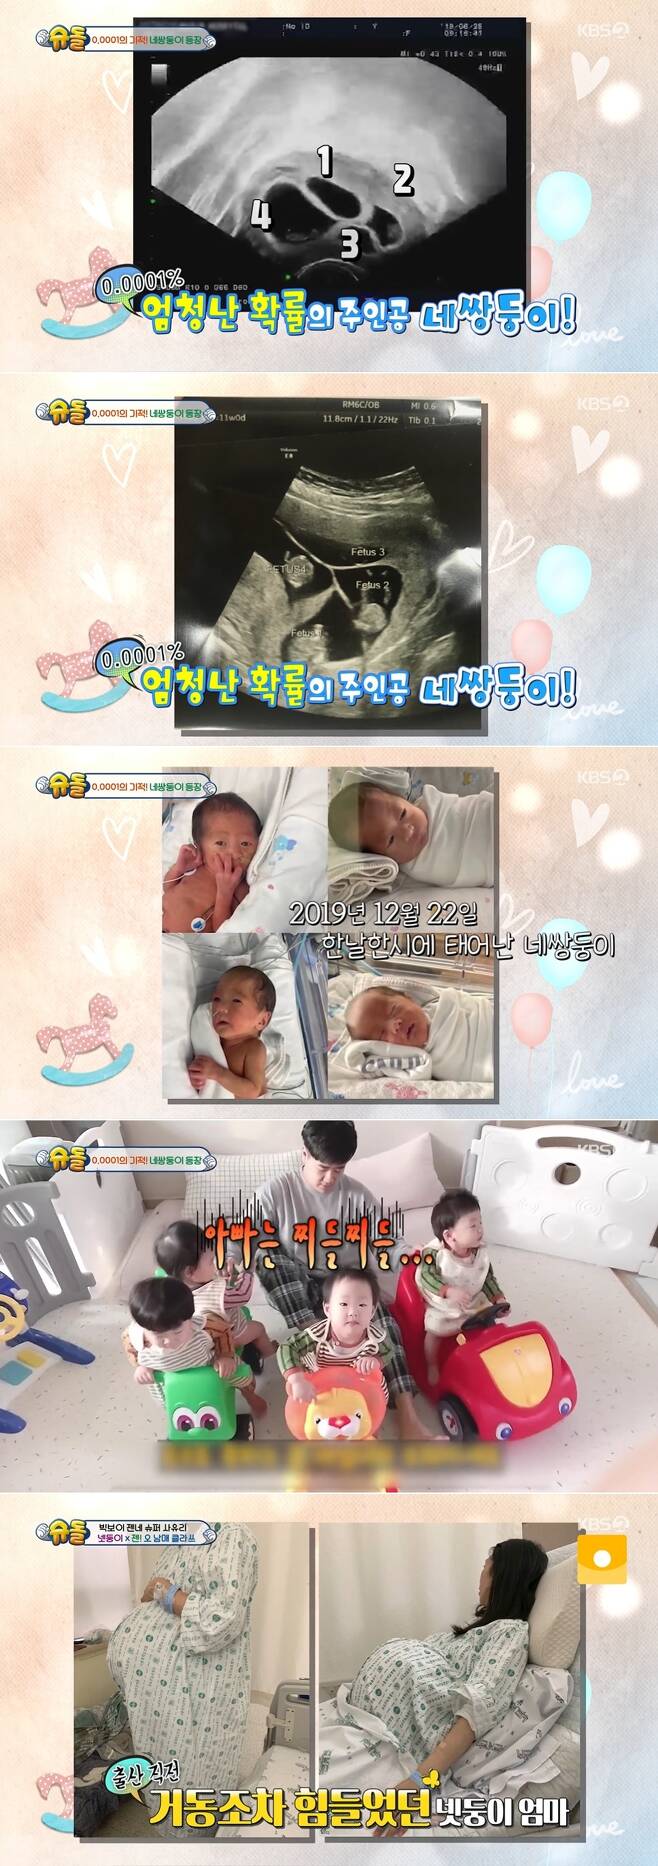 Marriage 5 years Lee Han-Sol, Na Hye-seung and four-twin daily life were revealed.On August 8th, KBS 2TV The Return of Superman 393 times, broadcasters Sayuri and Jen Hat (child) visited Lee Han-Sol and Na Hye-seungs house.Naturally, the probability of a net boy being born was 0.0001%.Sayuri, who watched the daily life of the net boy, which was a miracle from birth, on SNS, visited their nest on this day to meet them directly.Sayuri said: I saw four-twin on social media, Im still one son and I wanted to ask how I could take care of four people and help them.Four-twin is the first haon, the second hamin, the third haun, and the fourth hajun. Netney, who was born at one oclock in December 2019, entered the 19-month life.Both mother and father had no time to rest because they had to take care of their children at the same time from weather to eating, washing, and changing clothes.Among them, Hamin caused a smile to her mother with the brilliance of putting naked clothes directly into the laundry bin as Father asked.I thought it was hard for three people, but I can not even give my business card to that house, said actor So Yoo-jin, who watched this.Na Hye-seung said, I gave birth to four-twin due to natural pregnancy. I had two miscarriages before I got pregnant. The doctor also saw such a situation for the first time.At first, he said that it was more dangerous to miscarry because he was going to a big hospital. We were very surprised.